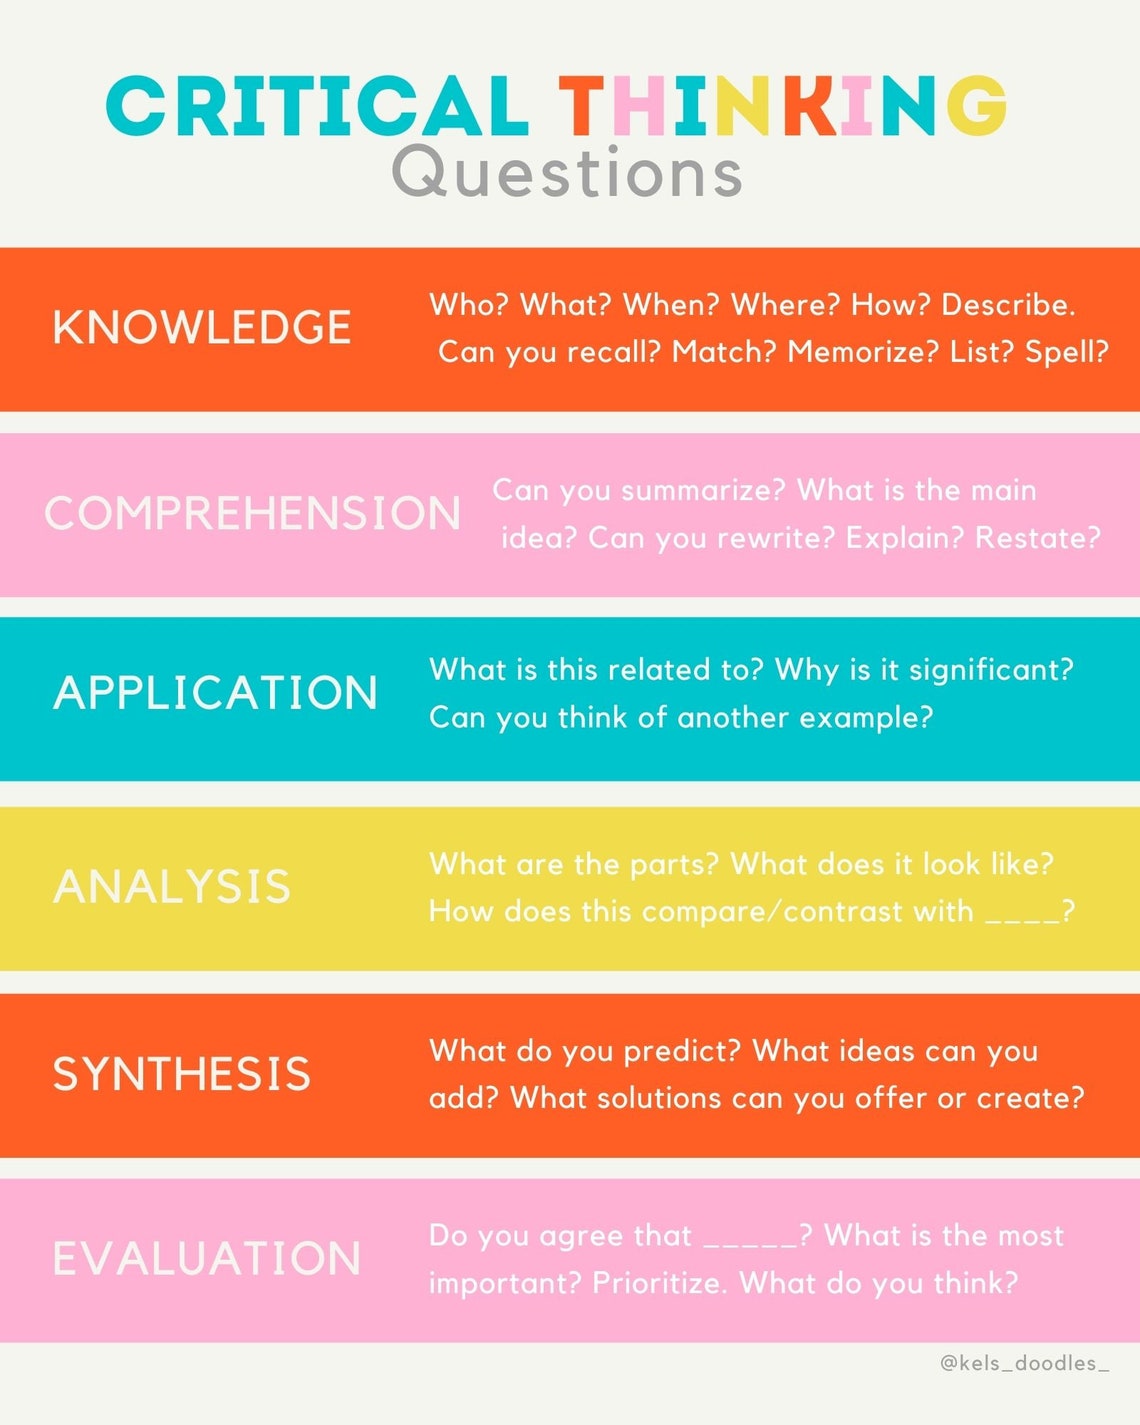 critical thinking questions cheat sheet